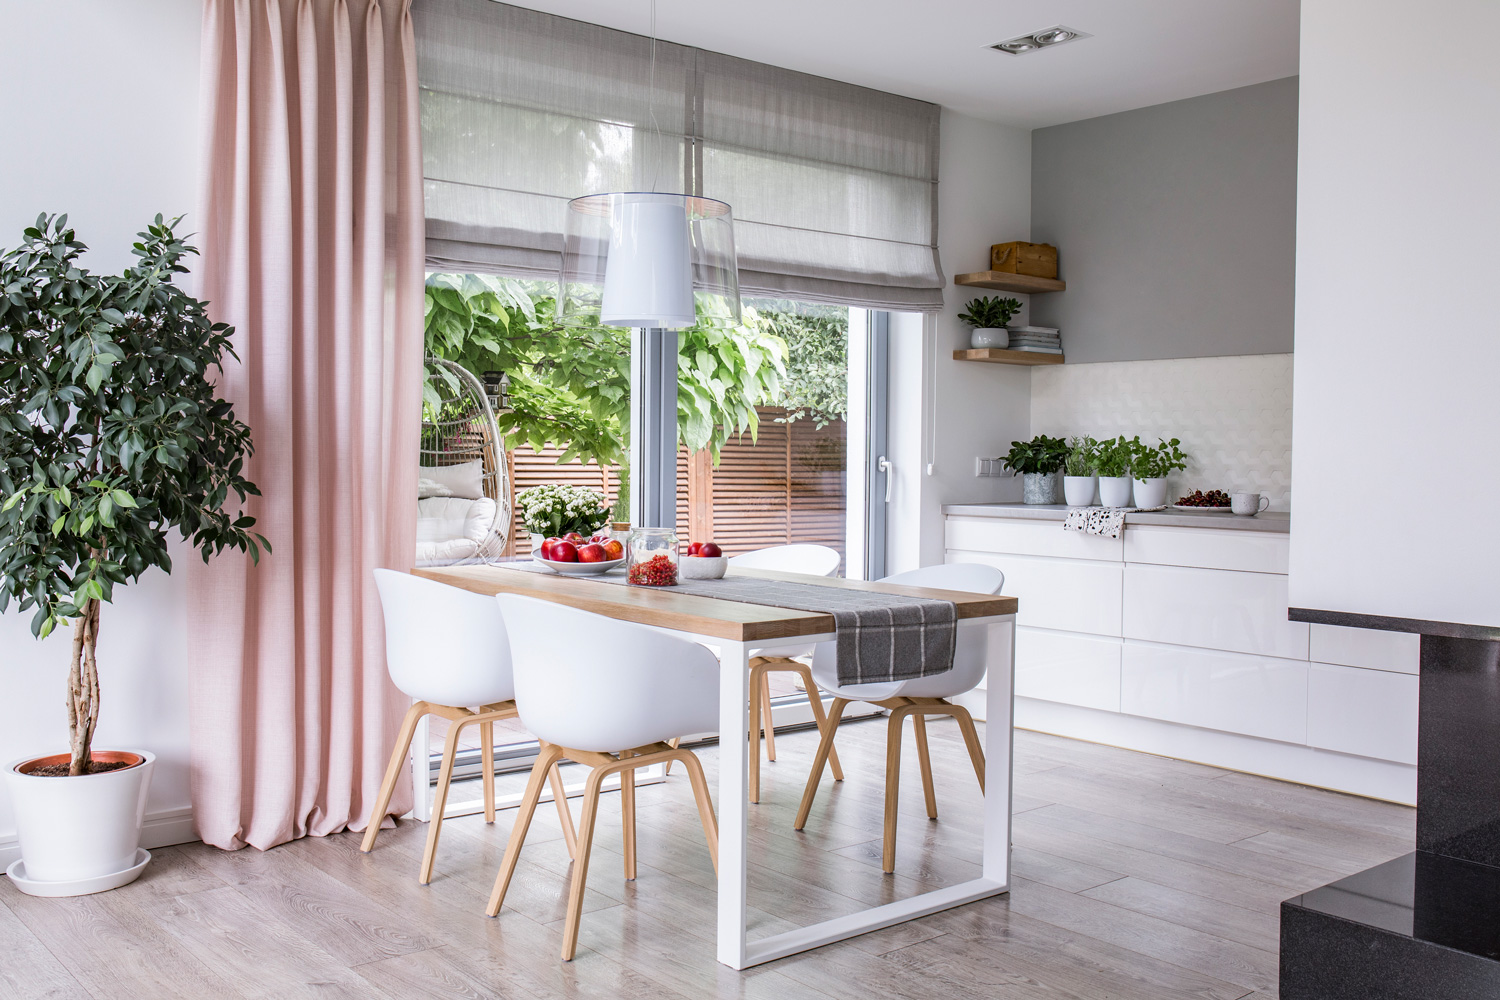 Gray roman shades and a pink curtain on big, glass windows in a modern kitchen and dining room interior with a wooden table and white chairs.